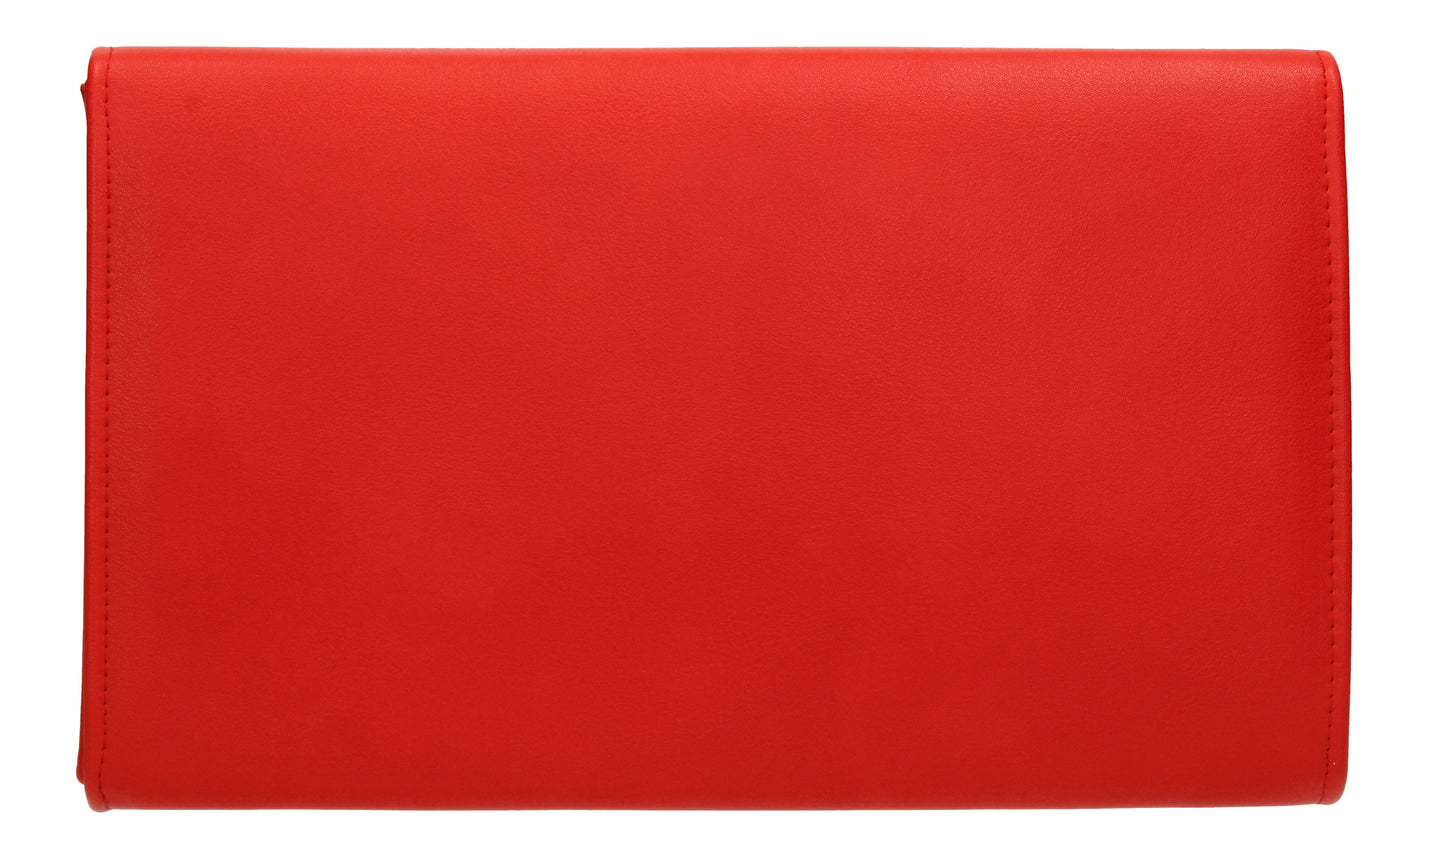 SWANKYSWANS Jenny Envelope Clutch Bag Red Cute Cheap Clutch Bag For Weddings School and Work